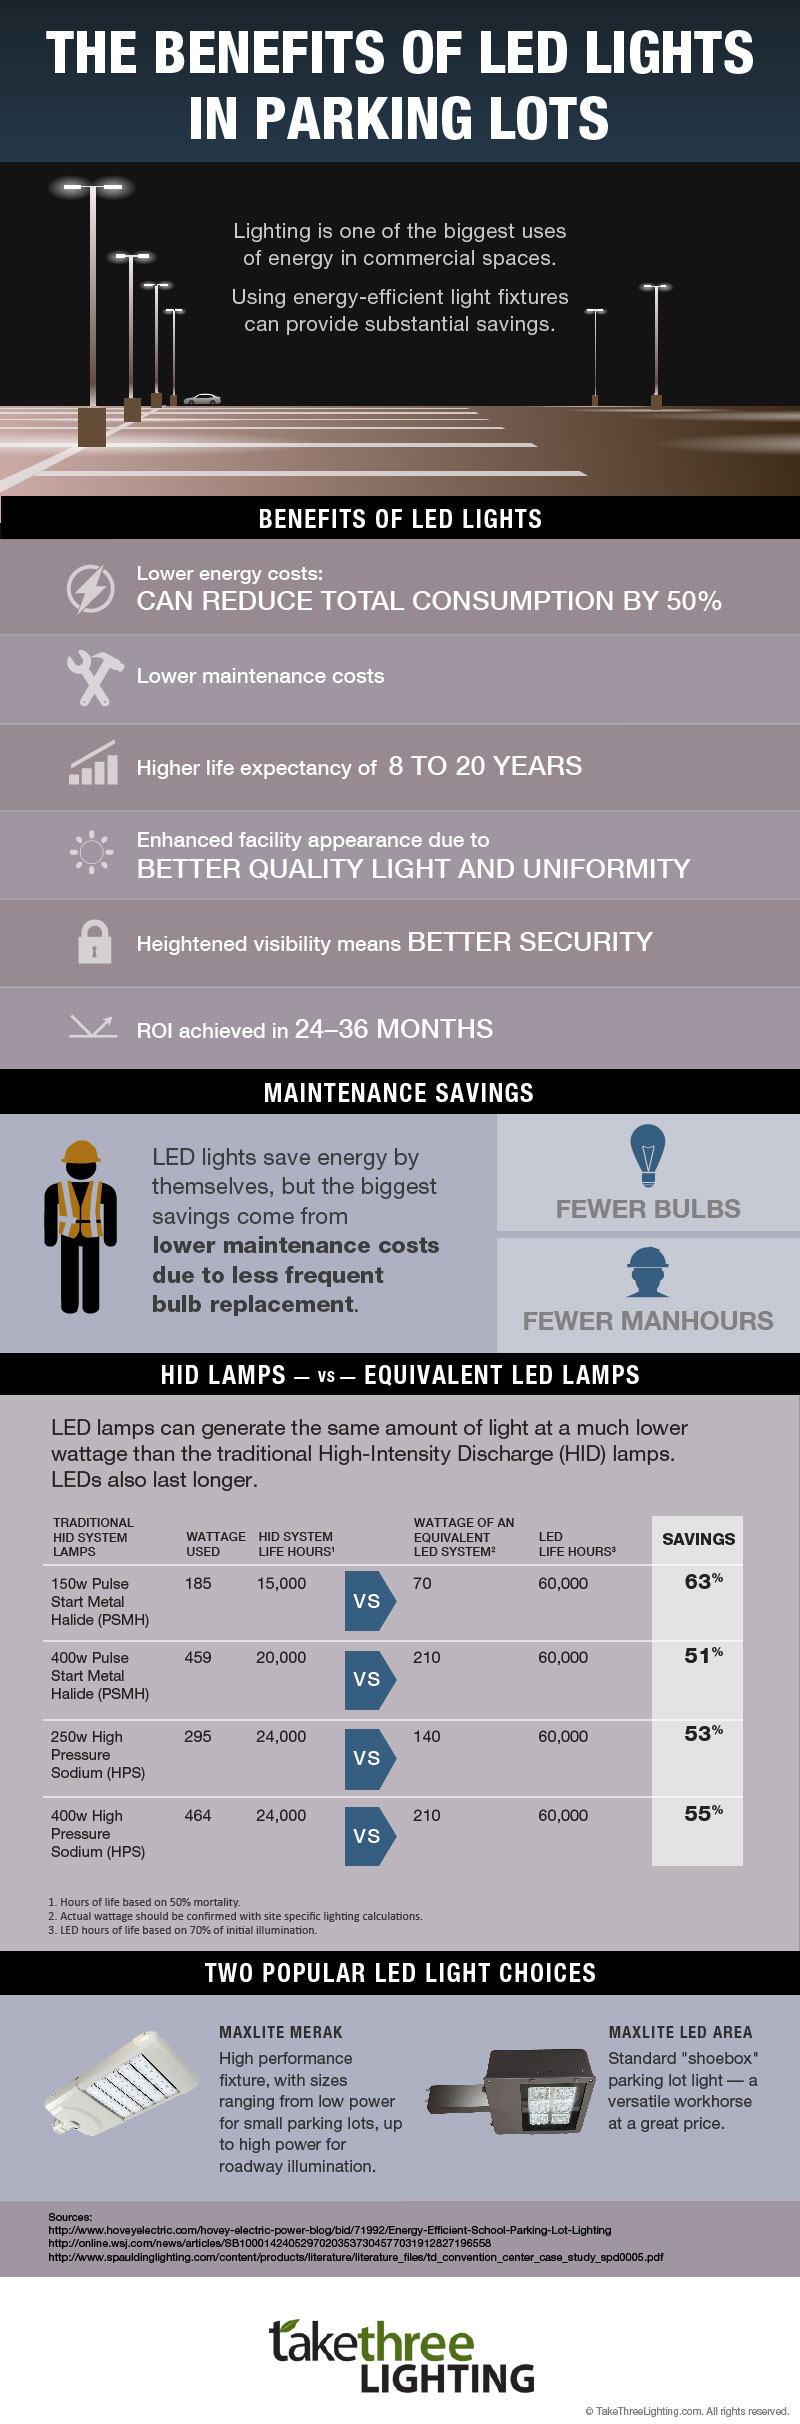 The benefits of LED lights in parking lots